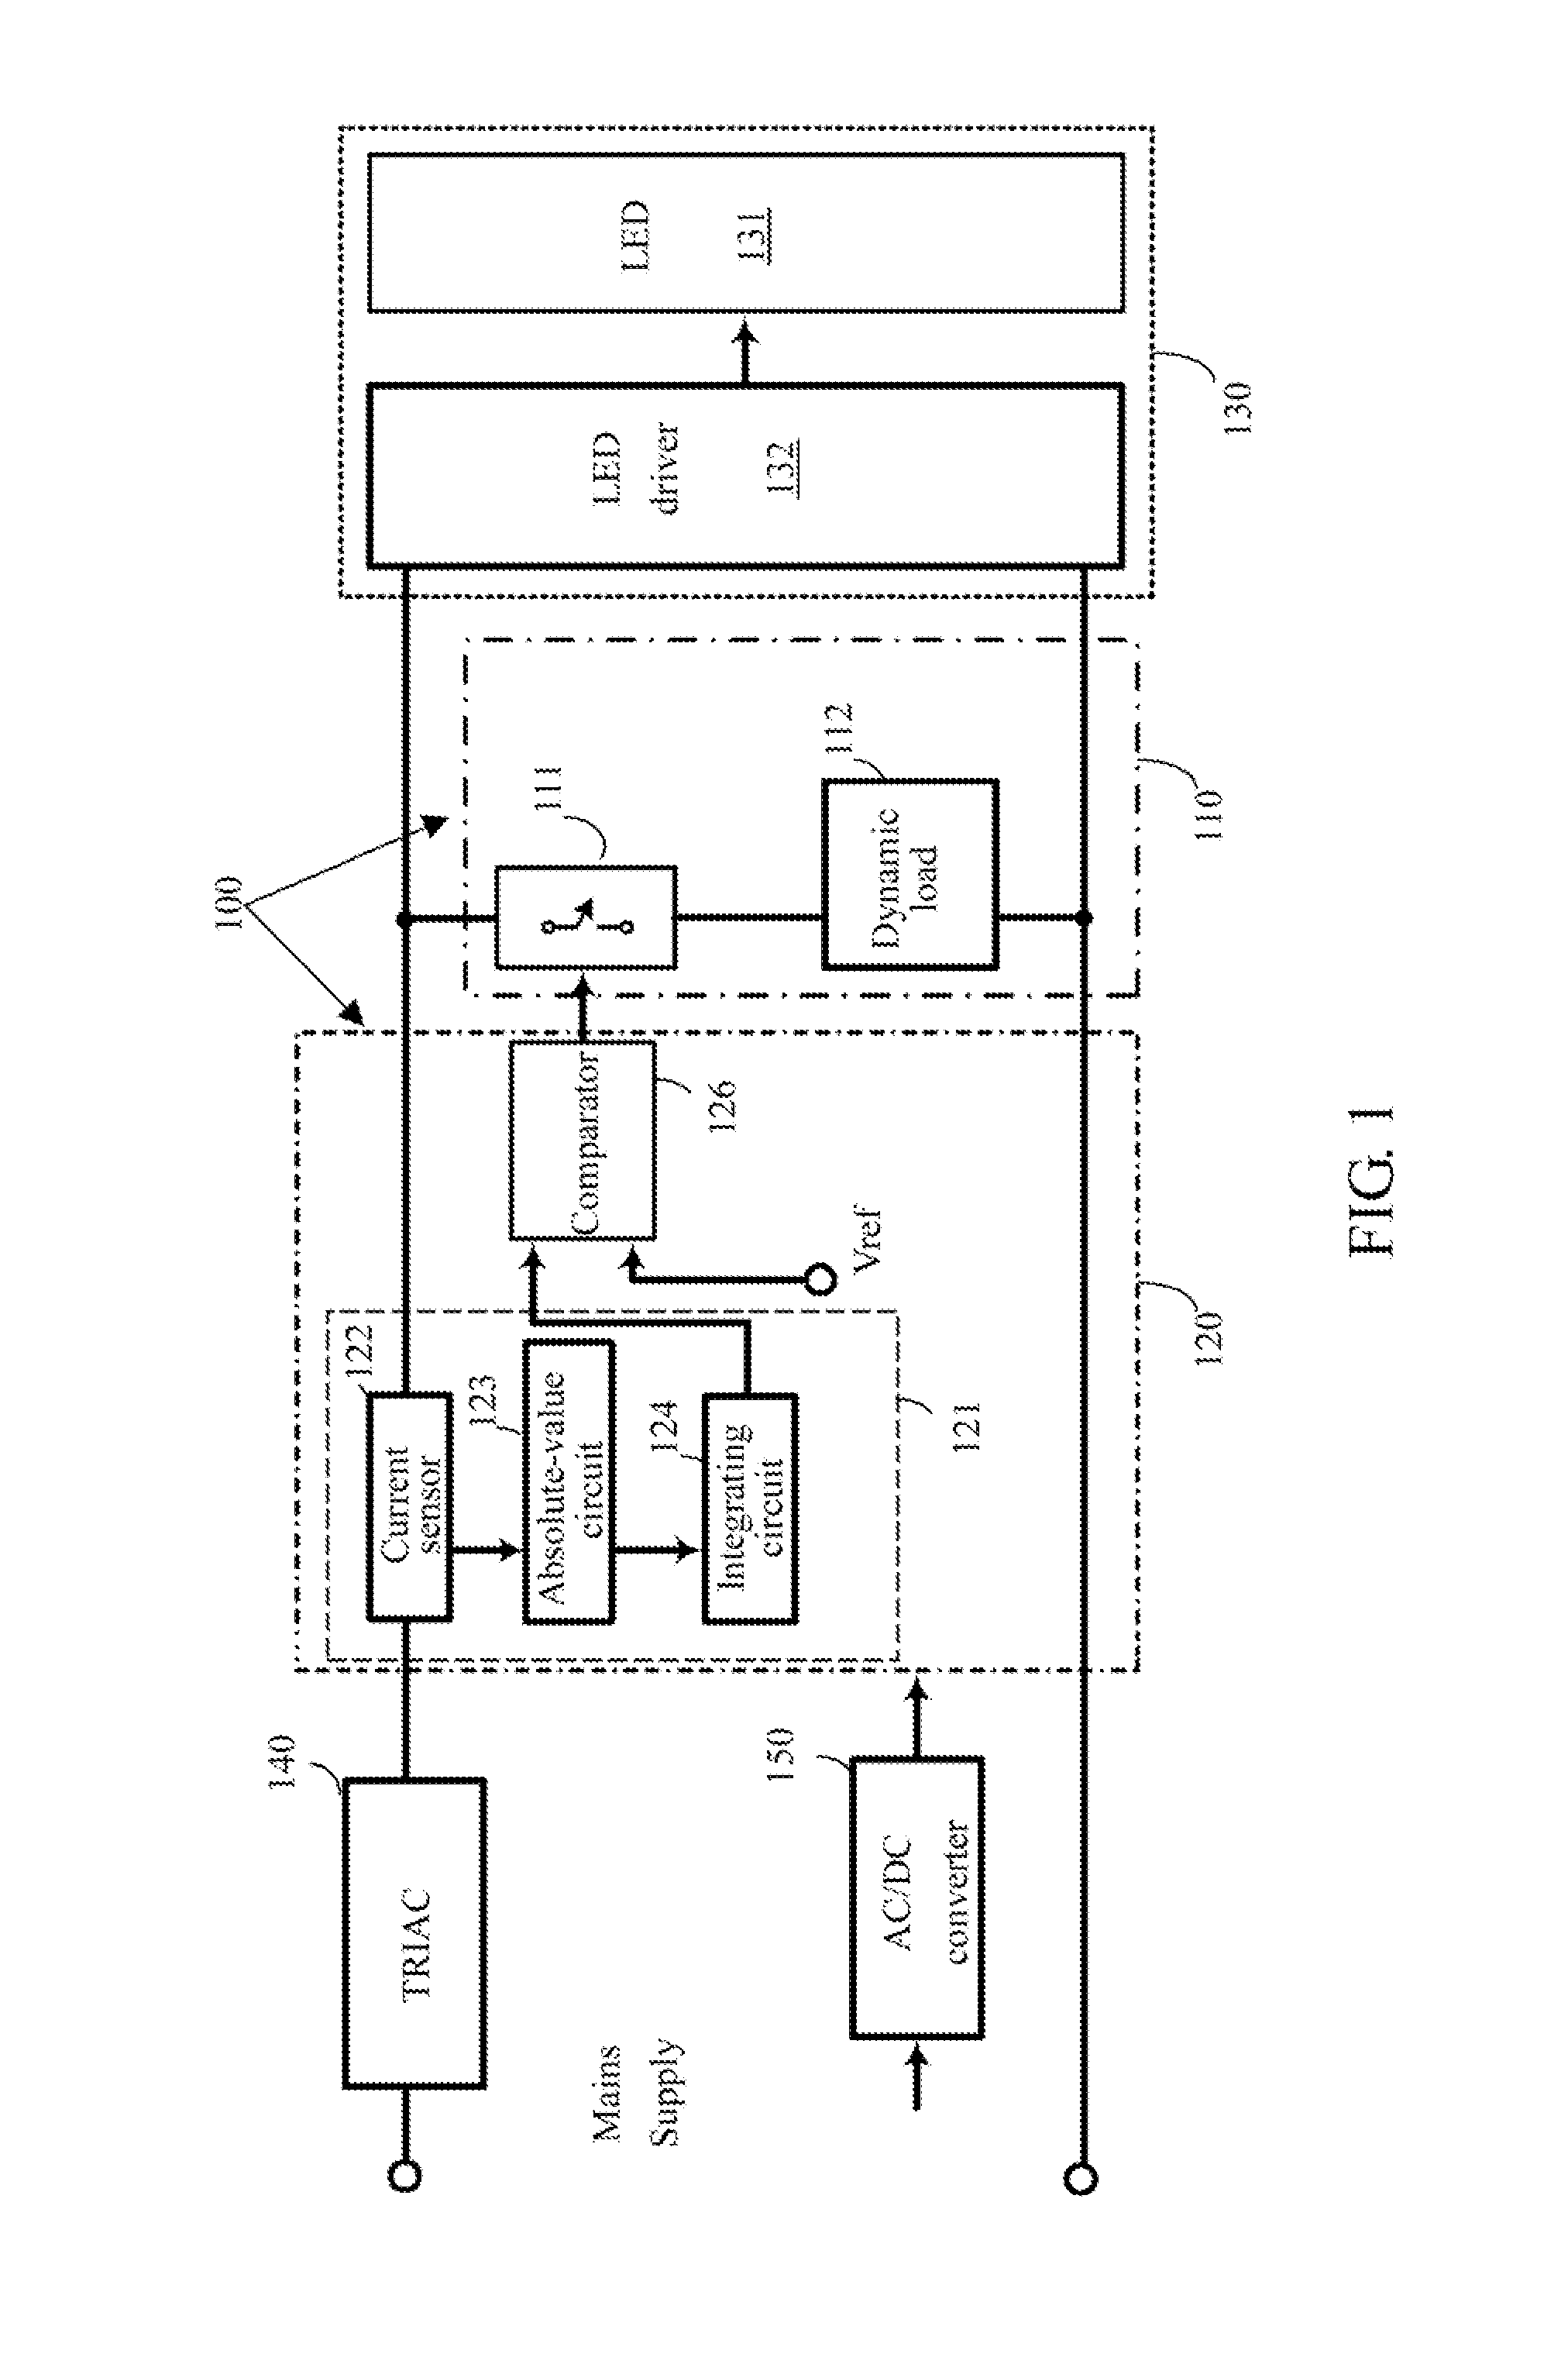 Application circuit and control method thereof